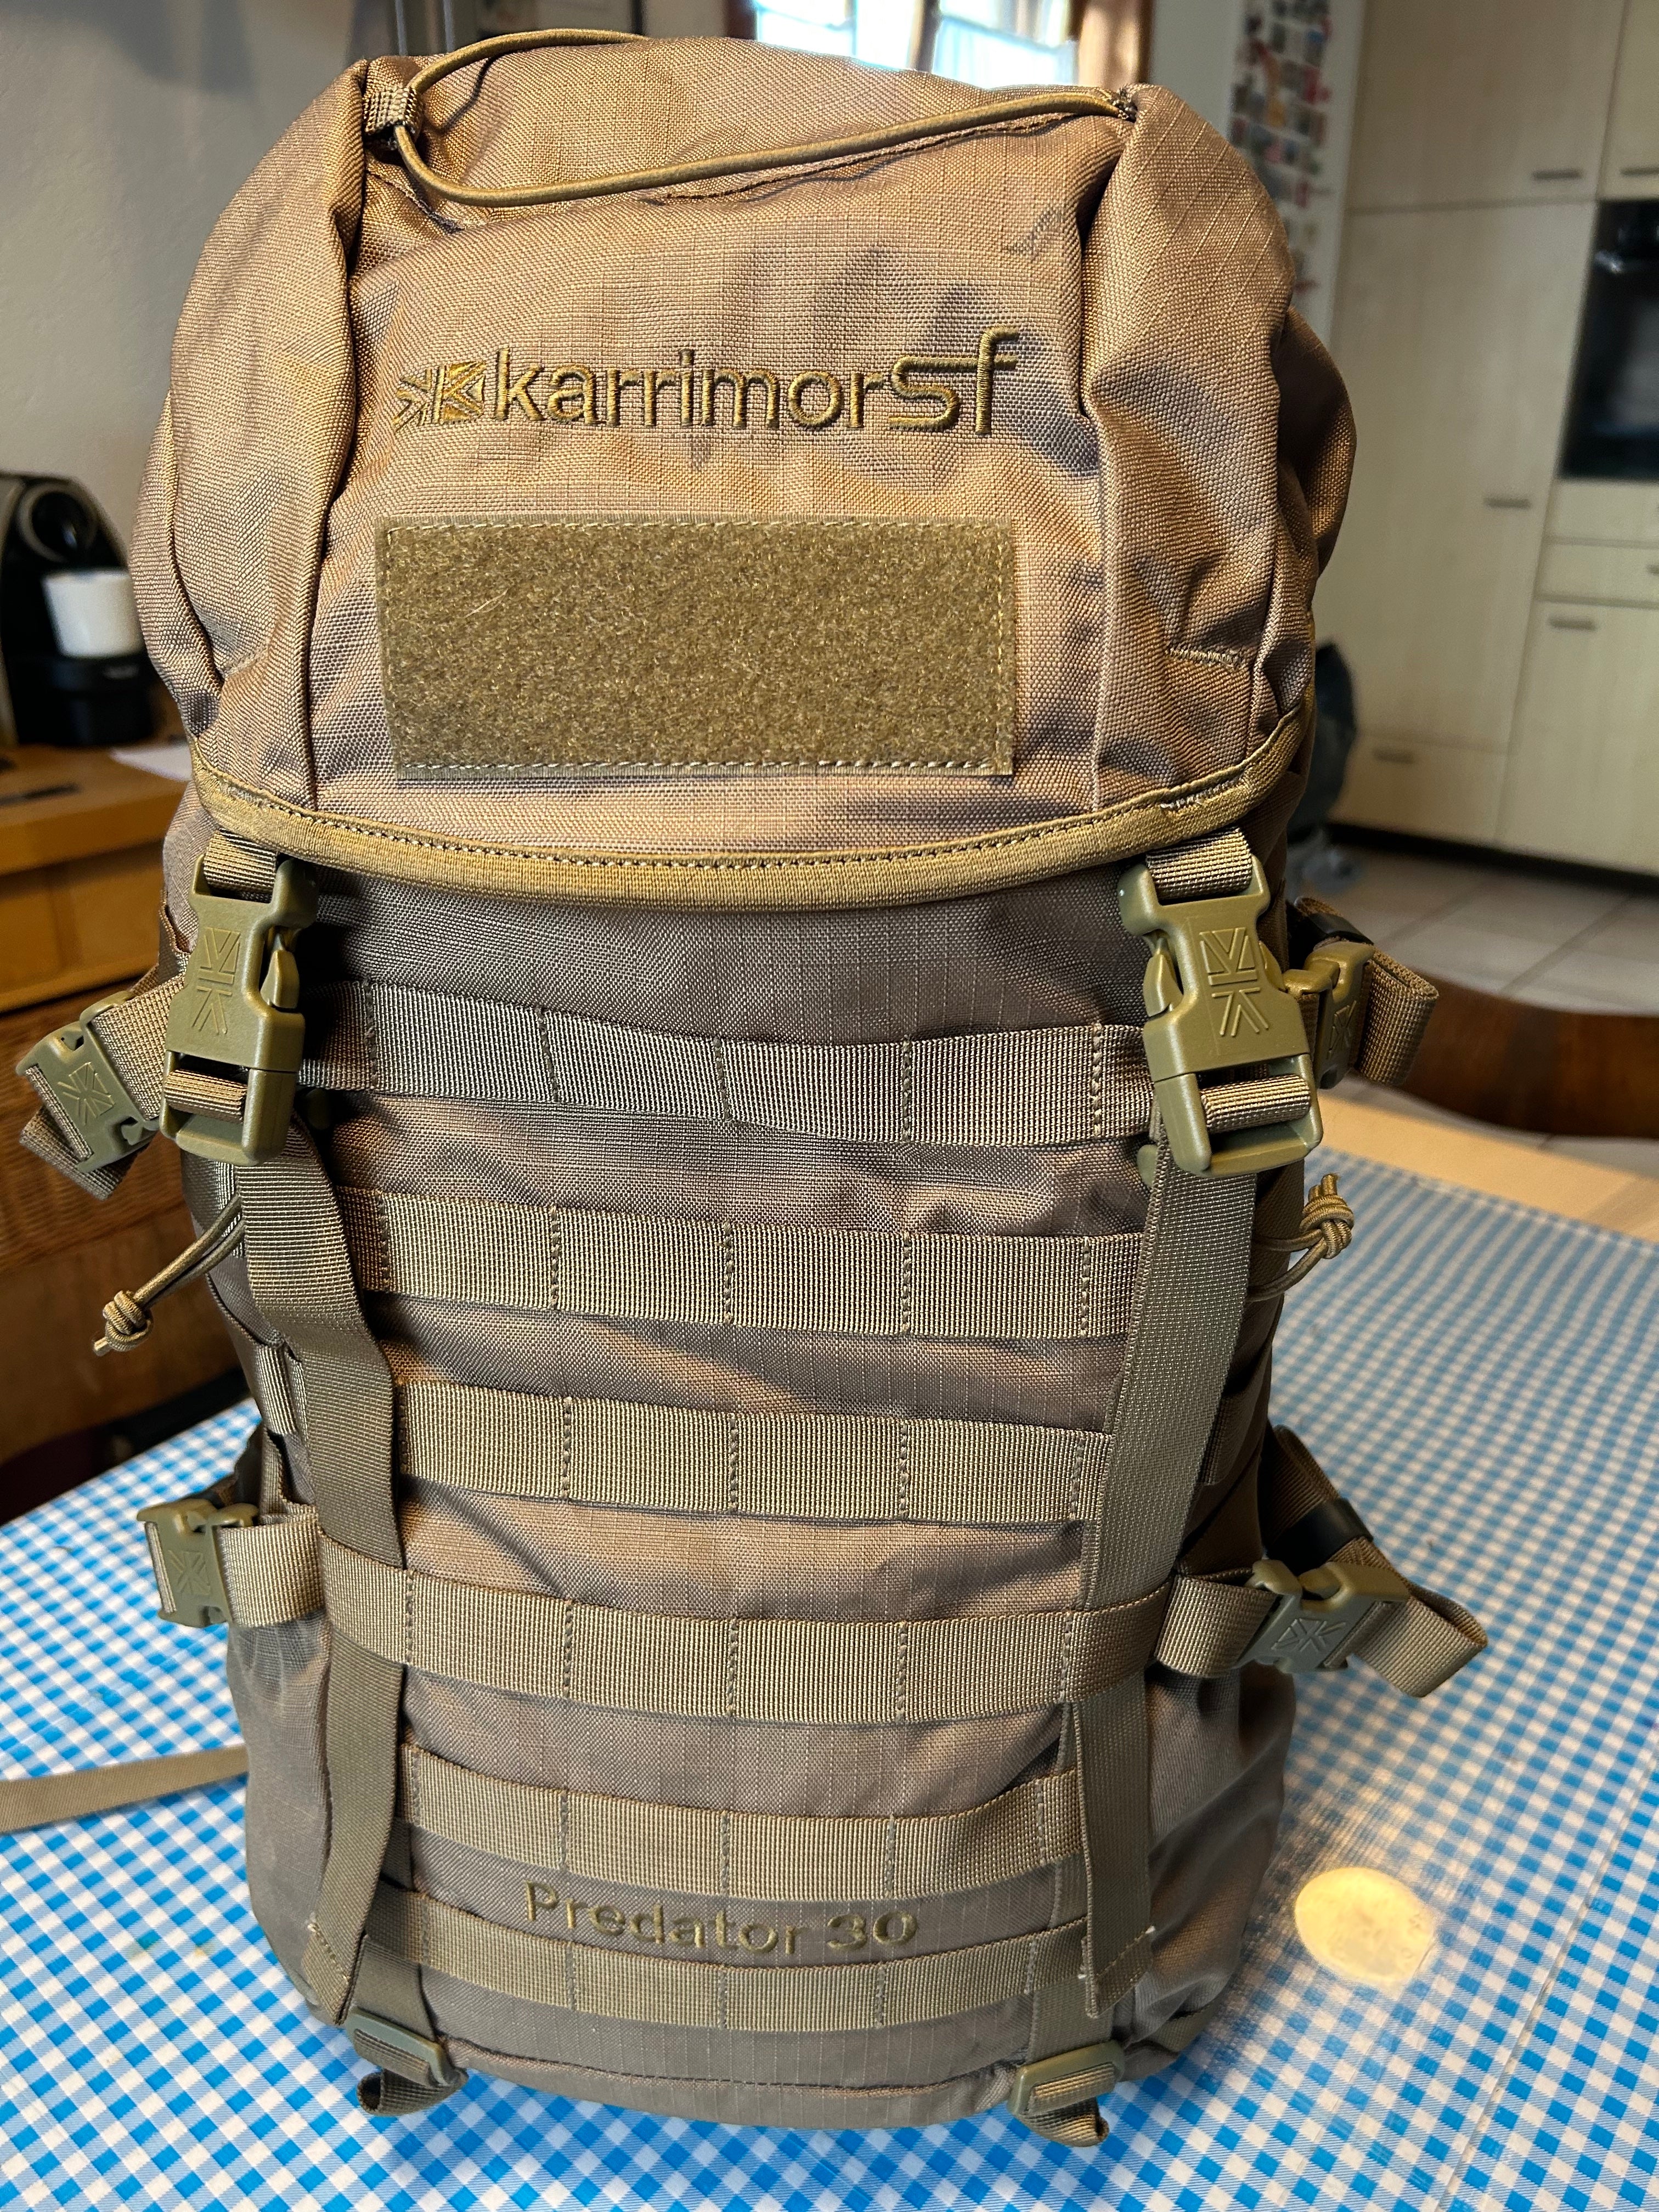 Backpack, Karrimor SF Predator 30, Coyote (Used) new condition